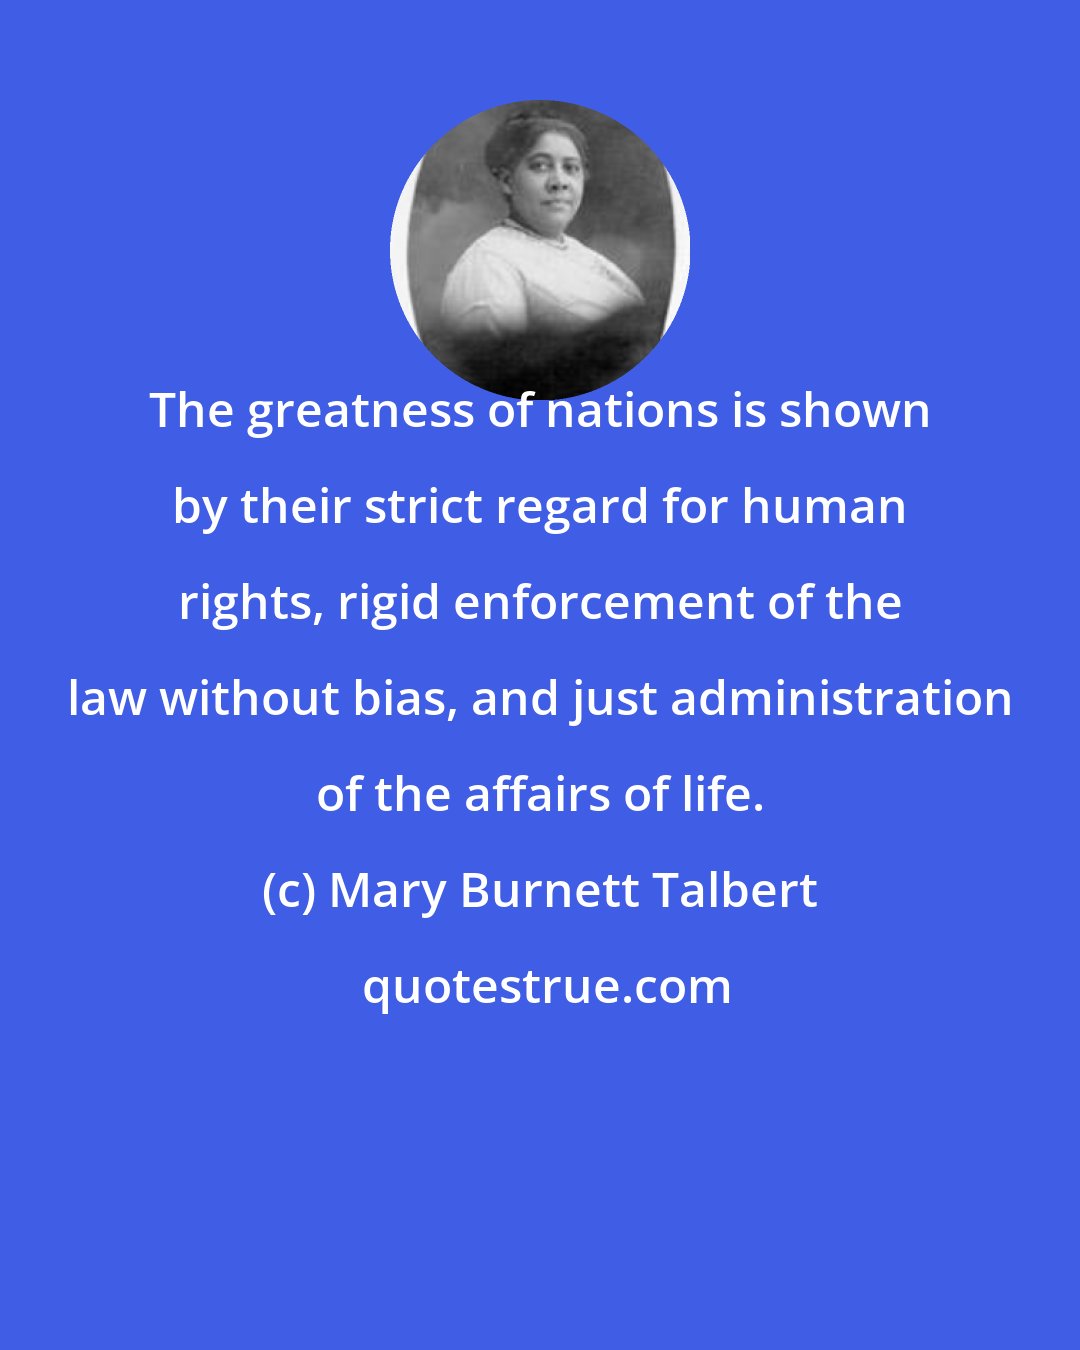 Mary Burnett Talbert: The greatness of nations is shown by their strict regard for human rights, rigid enforcement of the law without bias, and just administration of the affairs of life.